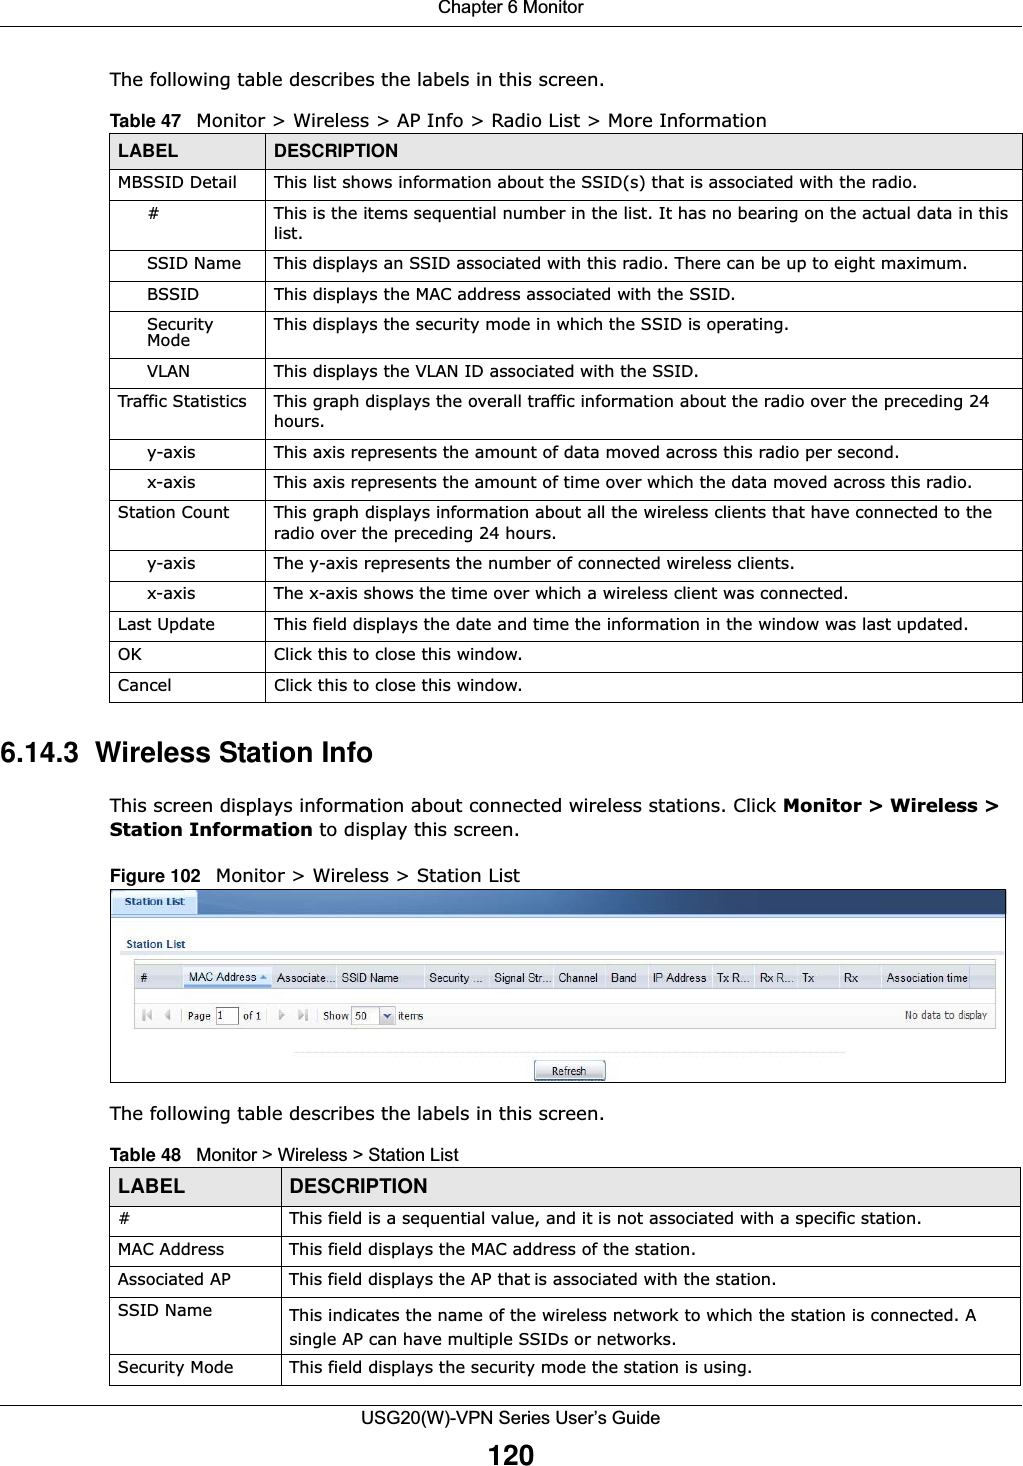 Chapter 6 MonitorUSG20(W)-VPN Series User’s Guide120The following table describes the labels in this screen. 6.14.3  Wireless Station InfoThis screen displays information about connected wireless stations. Click Monitor &gt; Wireless &gt; Station Information to display this screen.Figure 102   Monitor &gt; Wireless &gt; Station ListThe following table describes the labels in this screen.Table 47   Monitor &gt; Wireless &gt; AP Info &gt; Radio List &gt; More InformationLABEL DESCRIPTIONMBSSID Detail This list shows information about the SSID(s) that is associated with the radio.# This is the items sequential number in the list. It has no bearing on the actual data in this list.SSID Name This displays an SSID associated with this radio. There can be up to eight maximum.BSSID This displays the MAC address associated with the SSID.Security Mode This displays the security mode in which the SSID is operating.VLAN This displays the VLAN ID associated with the SSID.Traffic Statistics This graph displays the overall traffic information about the radio over the preceding 24 hours.y-axis This axis represents the amount of data moved across this radio per second.x-axis This axis represents the amount of time over which the data moved across this radio.Station Count This graph displays information about all the wireless clients that have connected to the radio over the preceding 24 hours.y-axis The y-axis represents the number of connected wireless clients.x-axis The x-axis shows the time over which a wireless client was connected.Last Update This field displays the date and time the information in the window was last updated. OK Click this to close this window.Cancel Click this to close this window.Table 48   Monitor &gt; Wireless &gt; Station ListLABEL DESCRIPTION# This field is a sequential value, and it is not associated with a specific station.MAC Address This field displays the MAC address of the station.Associated AP This field displays the AP that is associated with the station.SSID Name This indicates the name of the wireless network to which the station is connected. A single AP can have multiple SSIDs or networks.Security Mode This field displays the security mode the station is using.